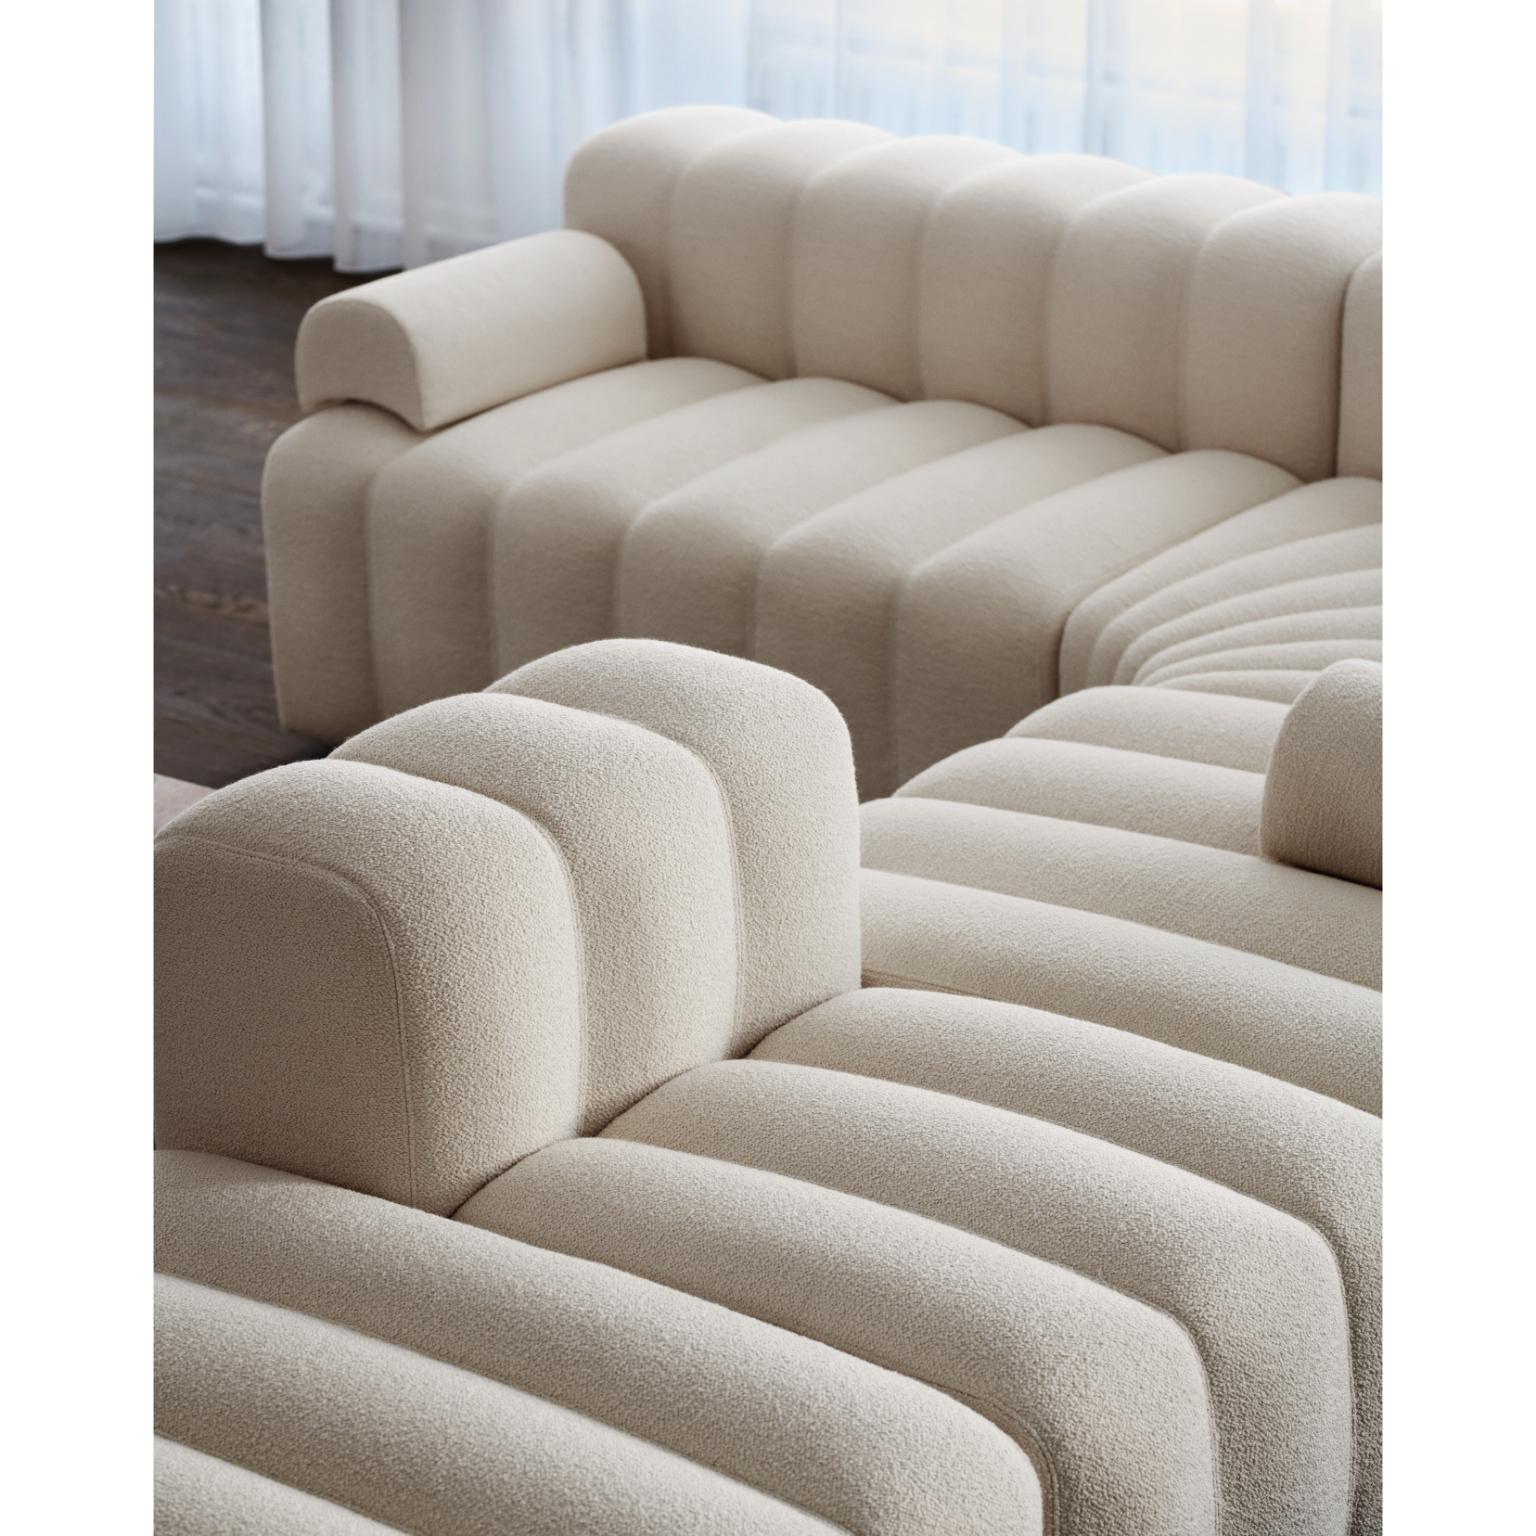 Studio Small Cushion by NORR11
Dimensions: W 50 x H 40 cm.
Materials: Foam, wood and upholstery.
Upholstery: Barnum Boucle Color 3.

Available in different upholstery options. Prices may vary. A plywood structure with elastic belts & foam. Different